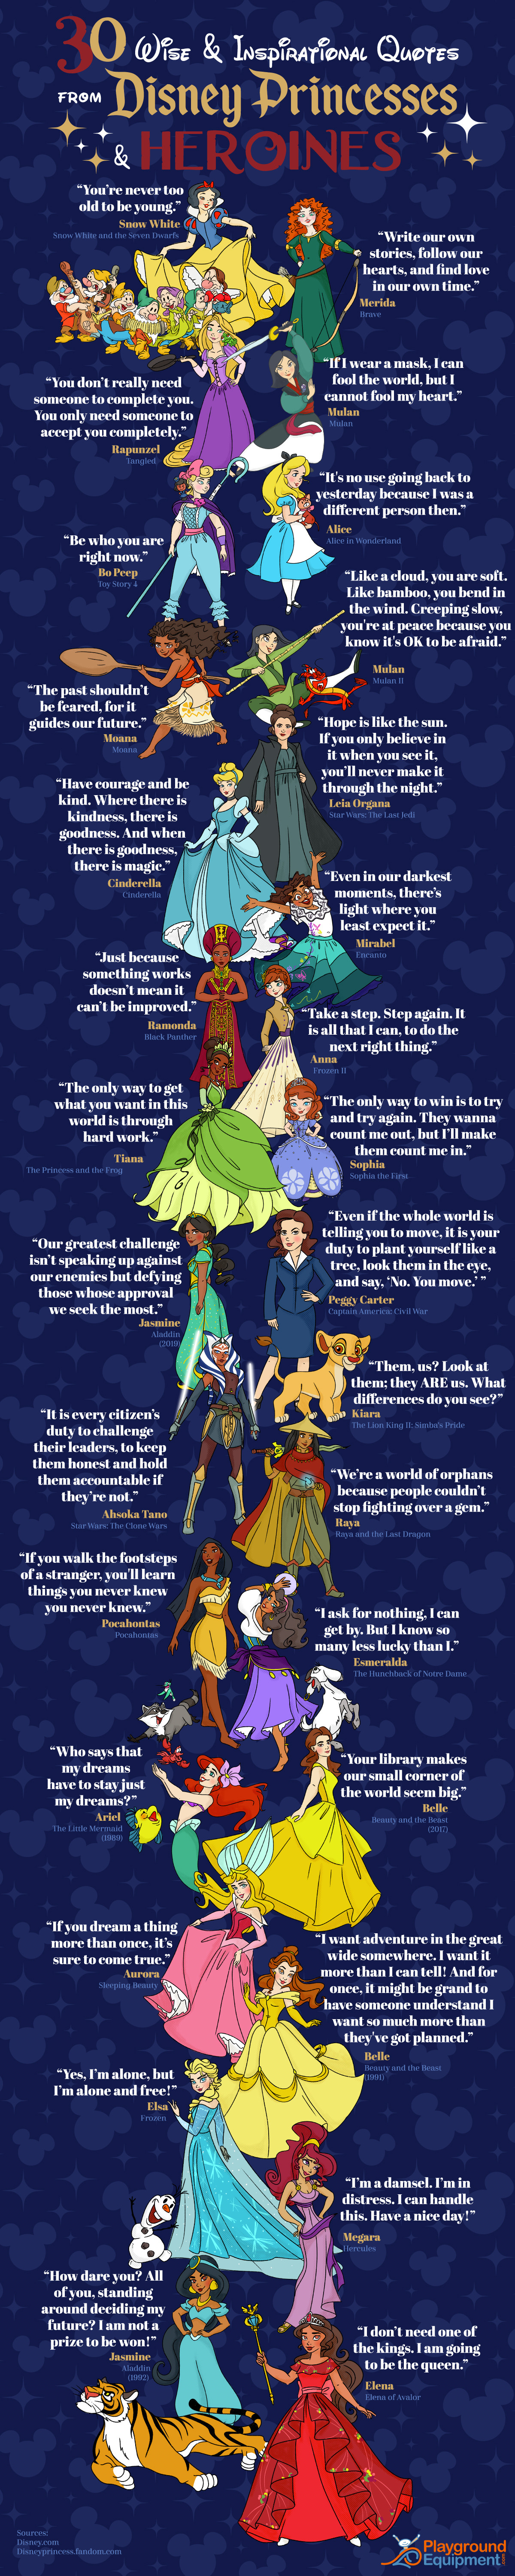 disney quotes about happiness